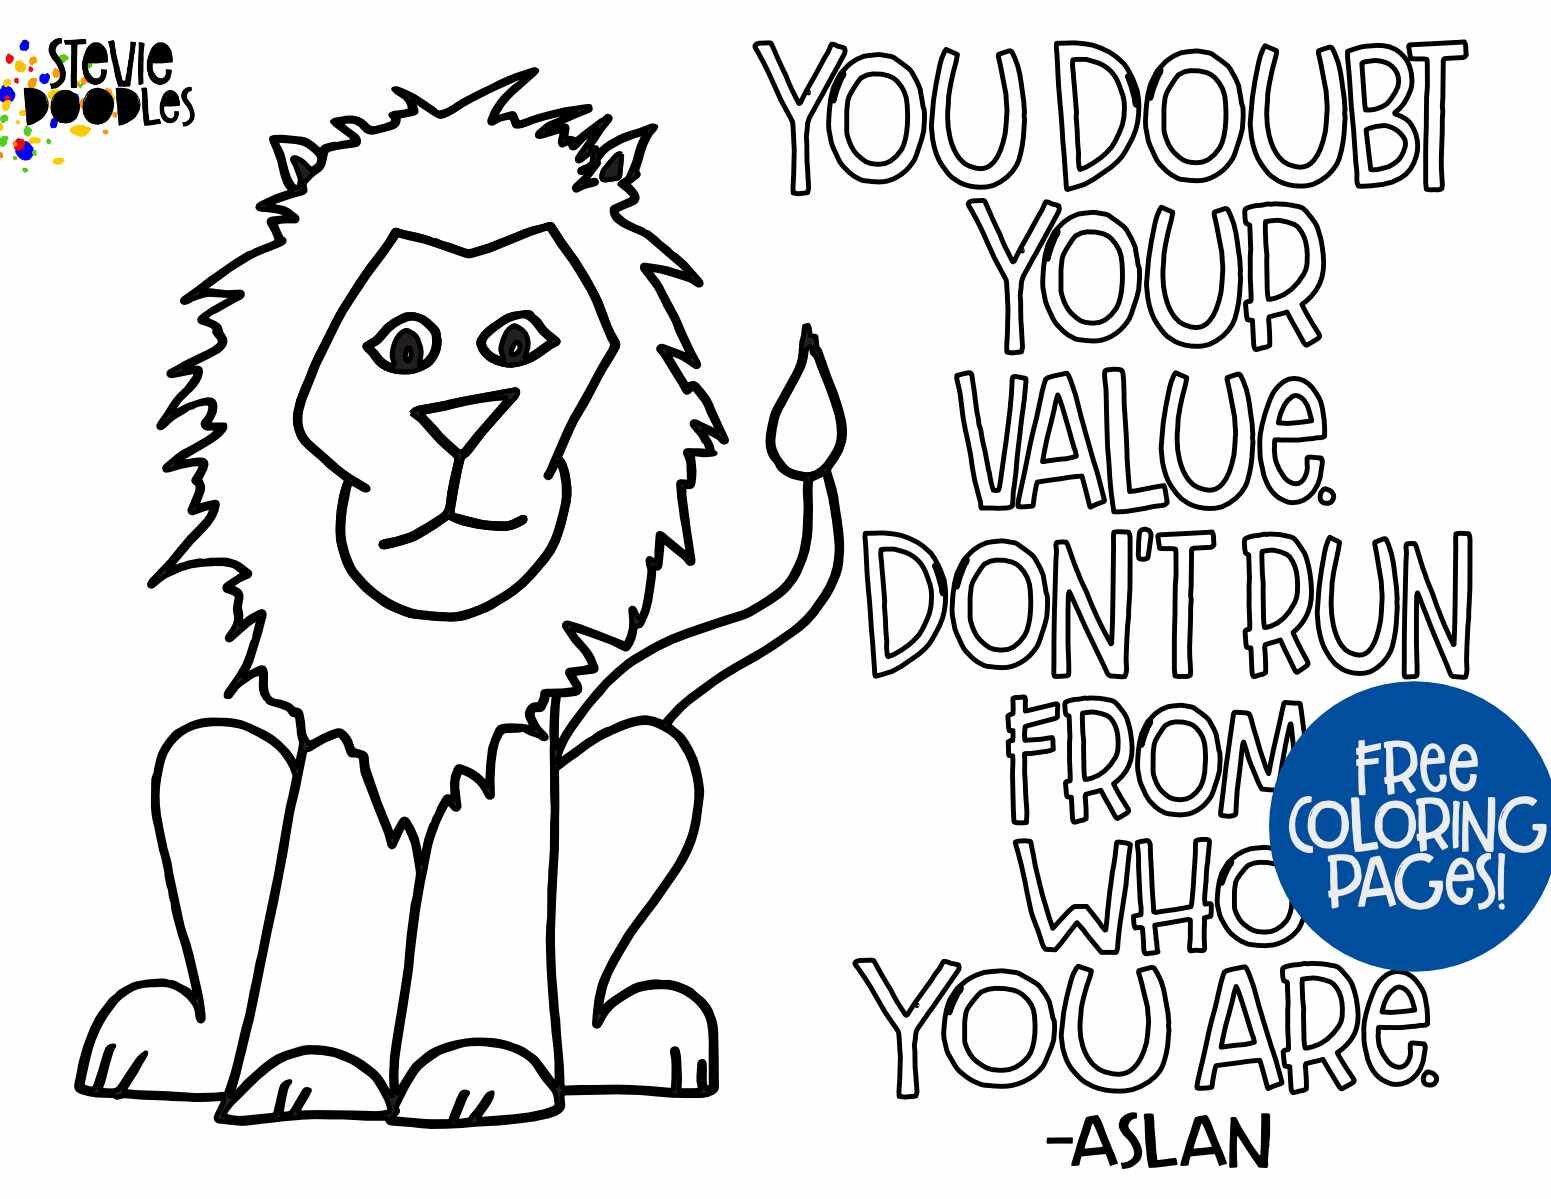 “You doubt your value. Don’t run from who you are.” - Aslan 3 Free Aslan Quote coloring pages from Stevie Doodles